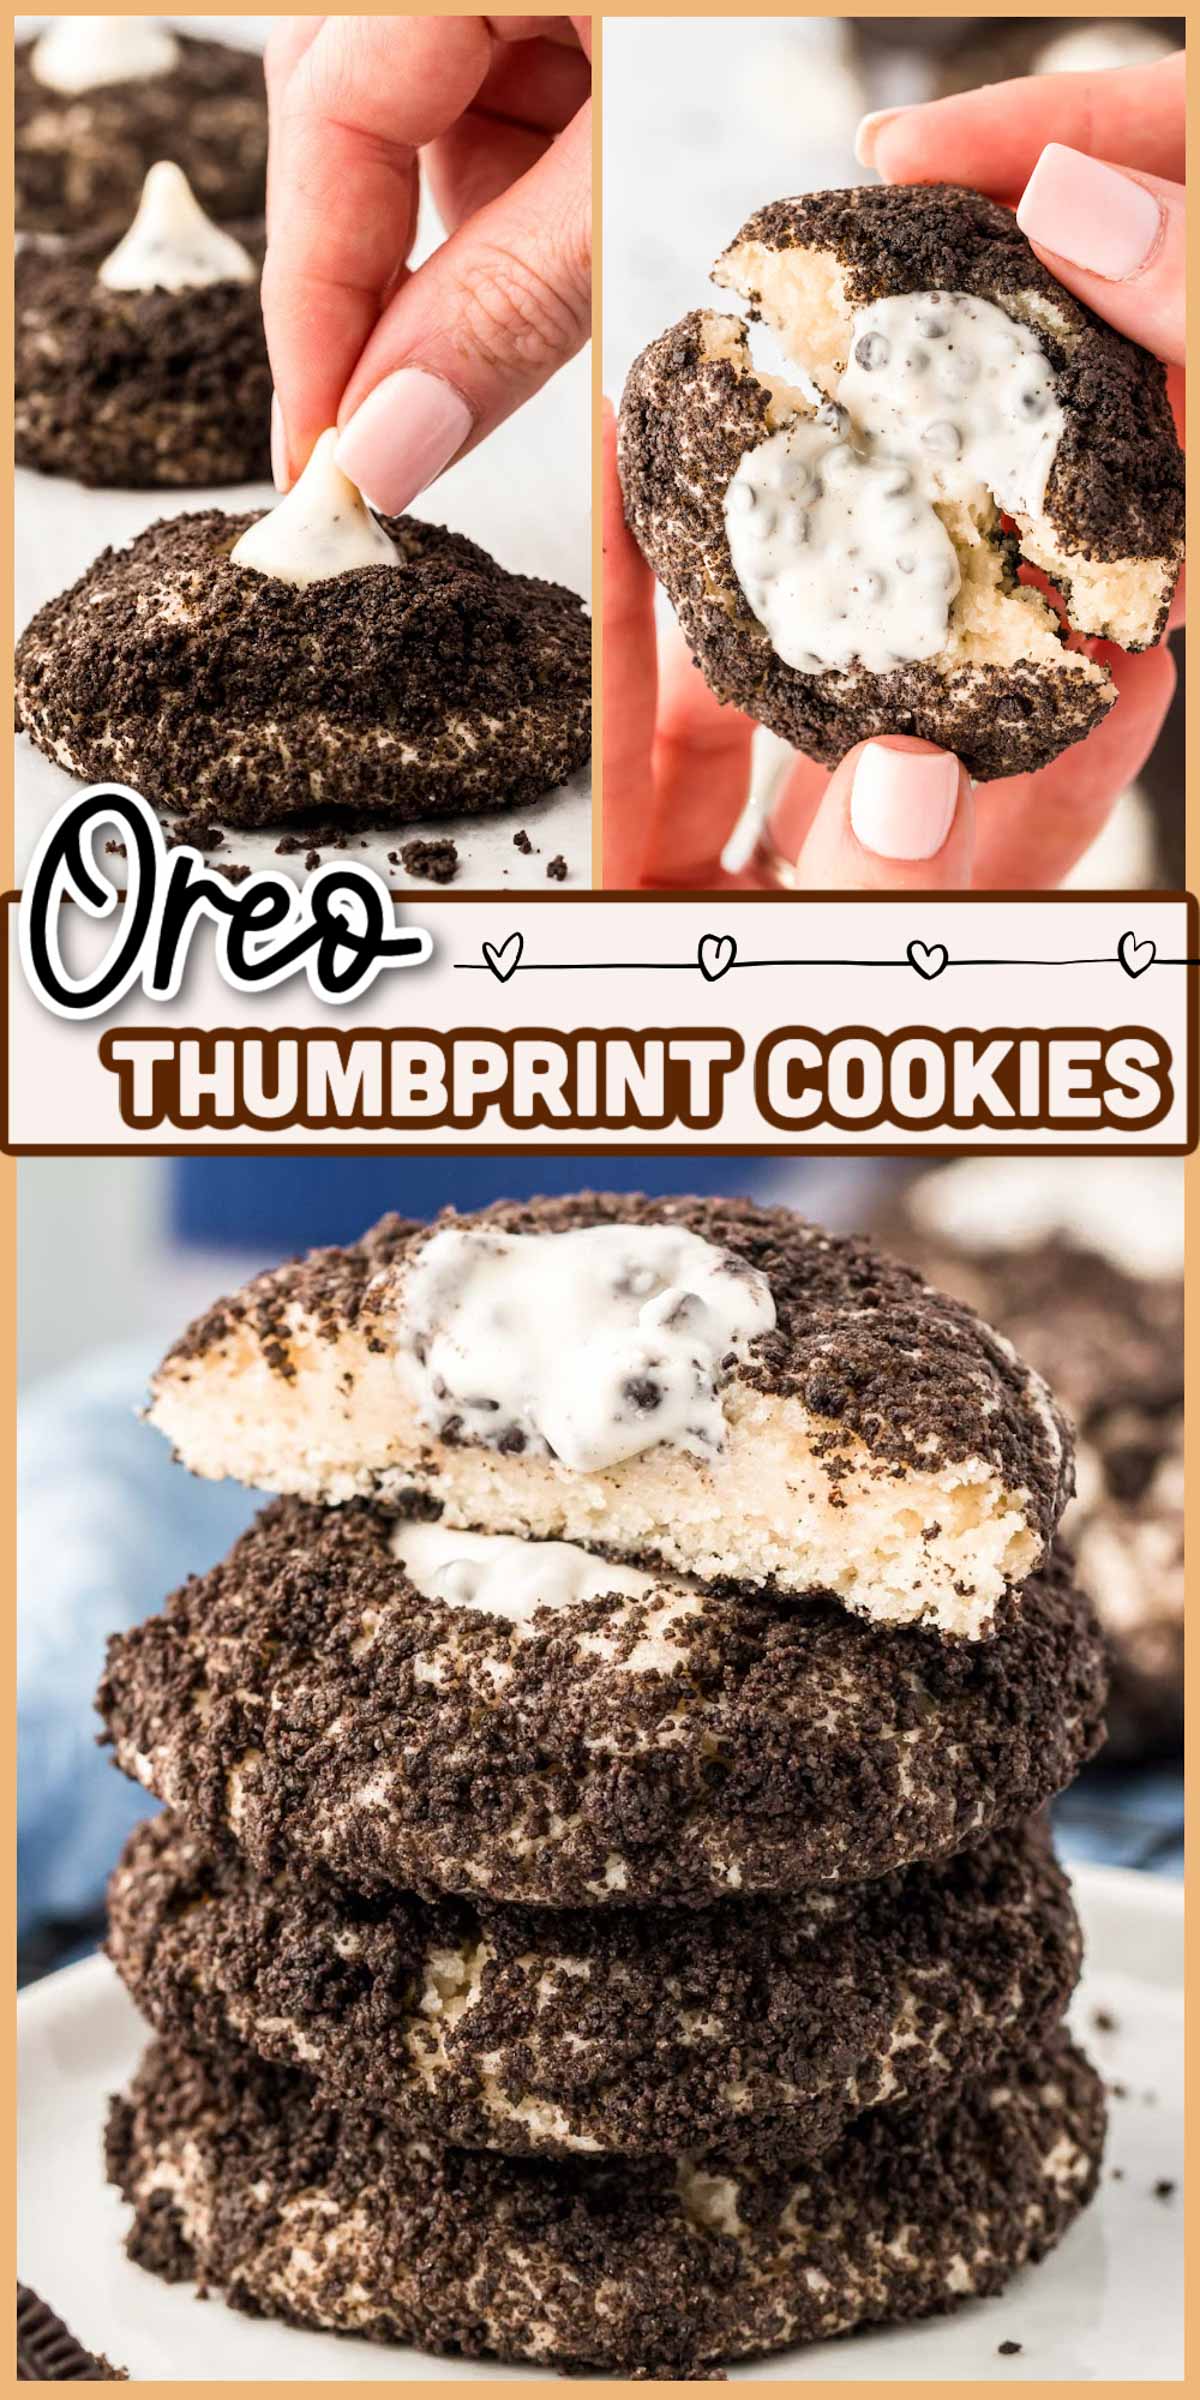 These Cookies and Cream Thumbprint Cookies use storebought sugar cookie dough and Double Stuf Oreos to create a delicious yet easy treat!  via @sugarandsoulco